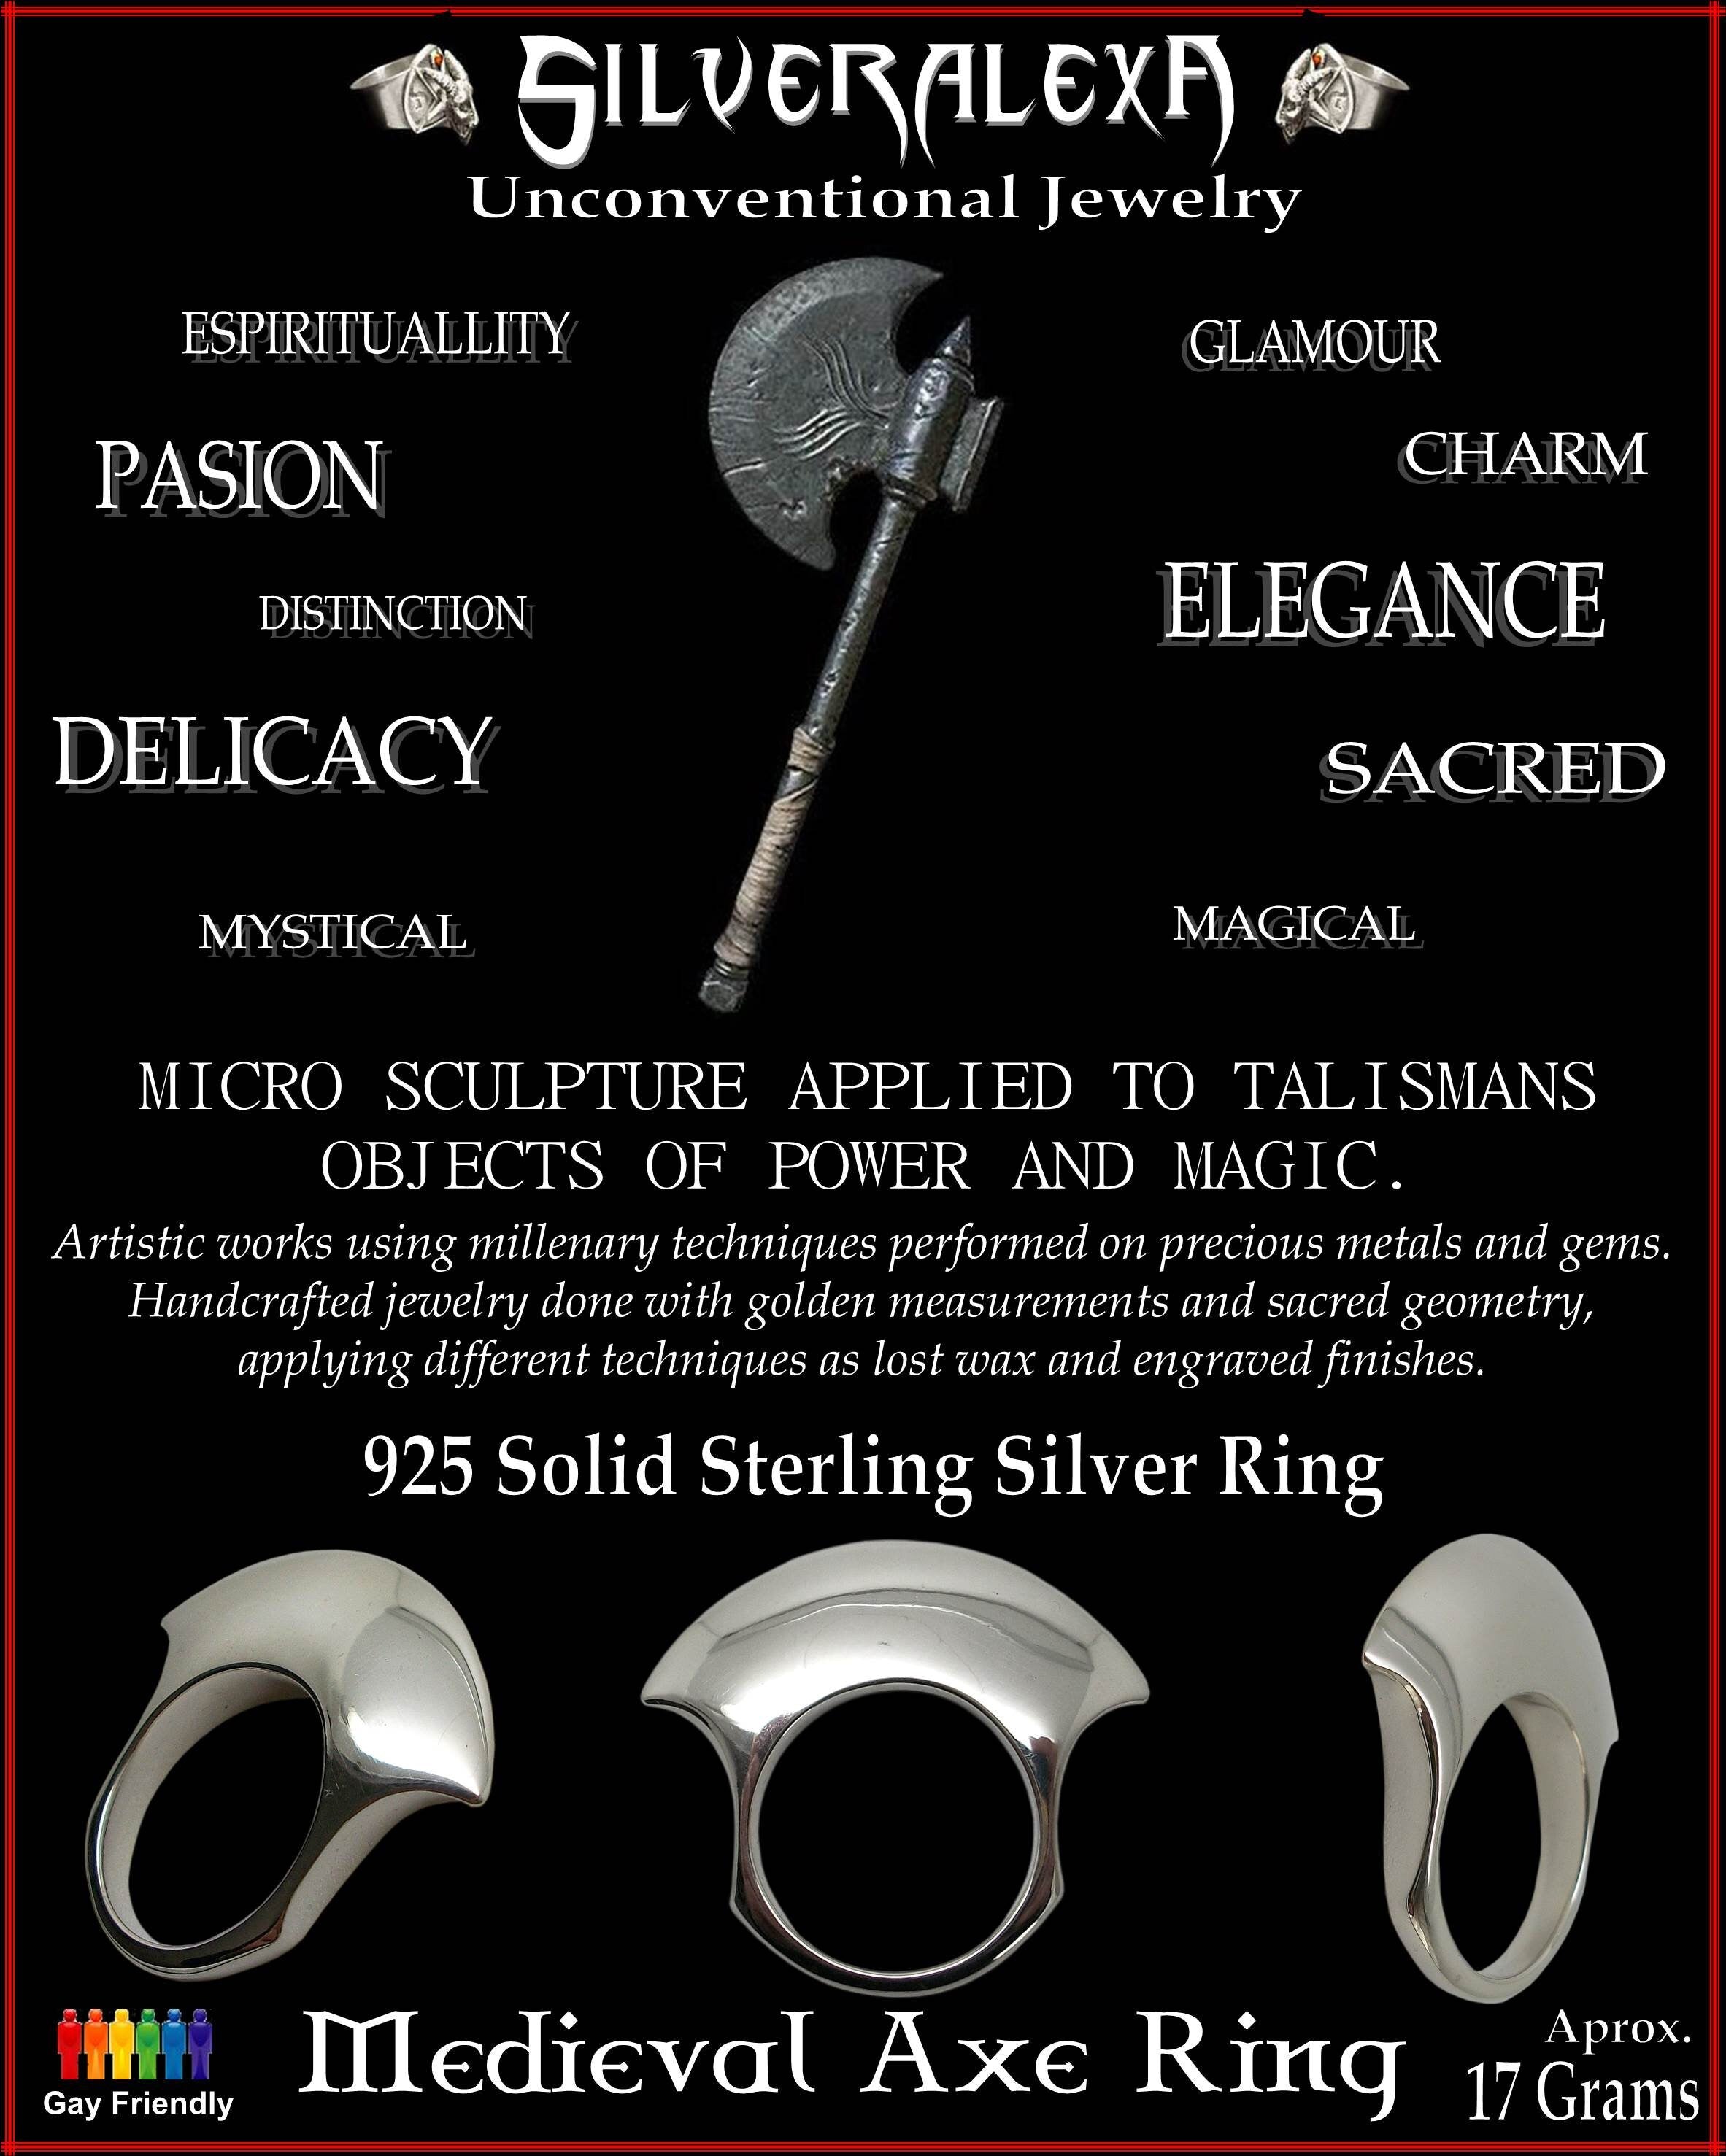 Axe ring - Sterling Silver Medieval Axe Ring - ALL SIZES